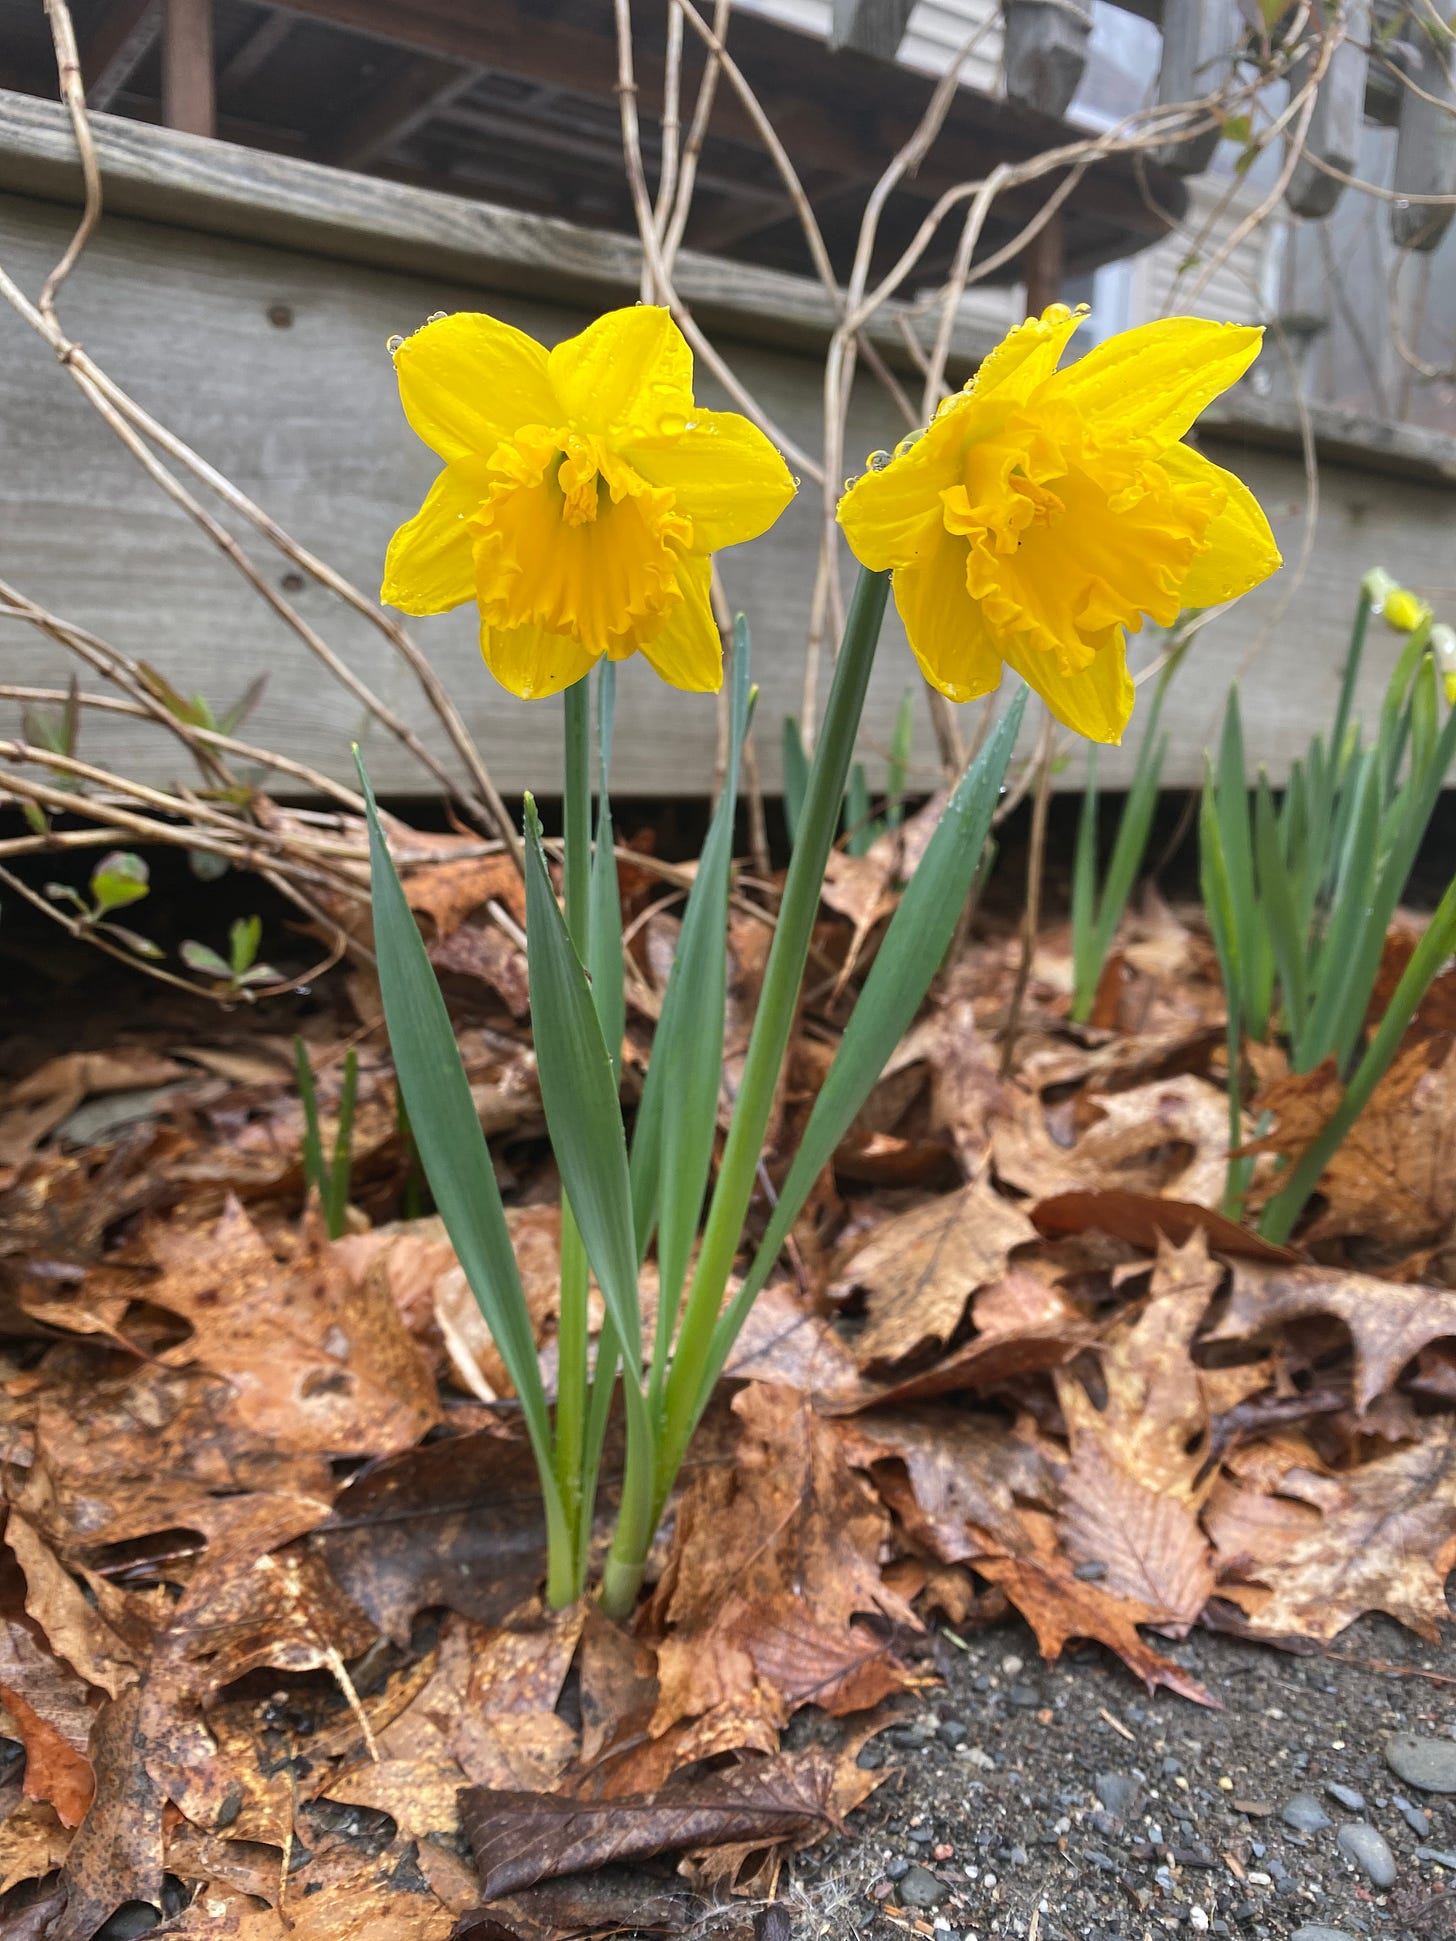 Two bright yellow daffodils blooming in front of my porch.